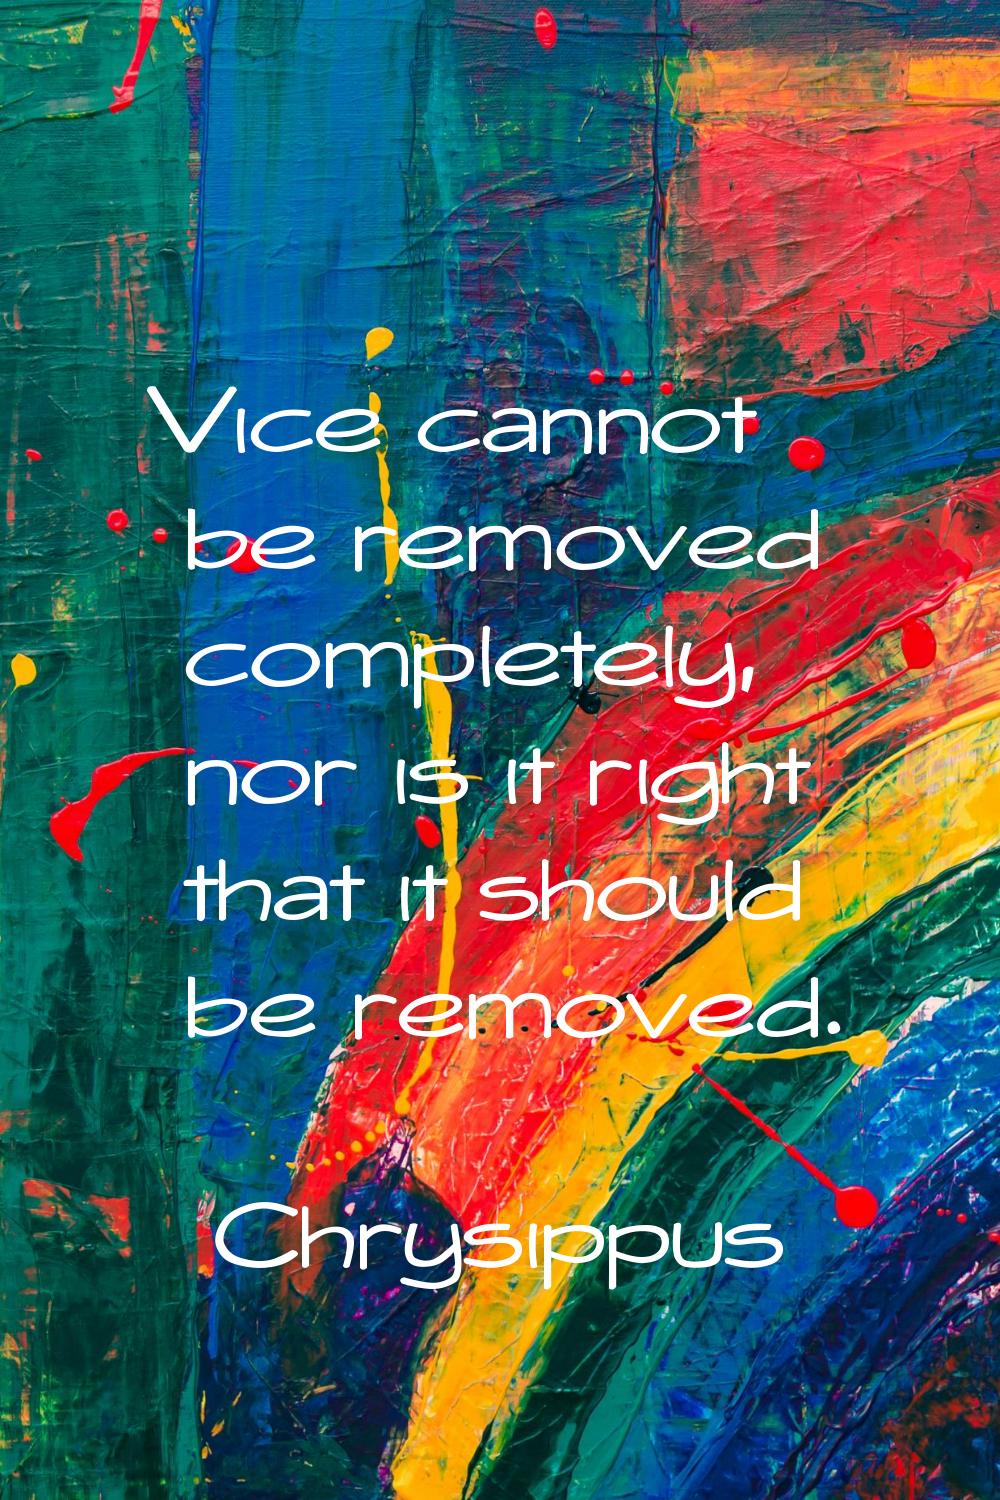 Vice cannot be removed completely, nor is it right that it should be removed.